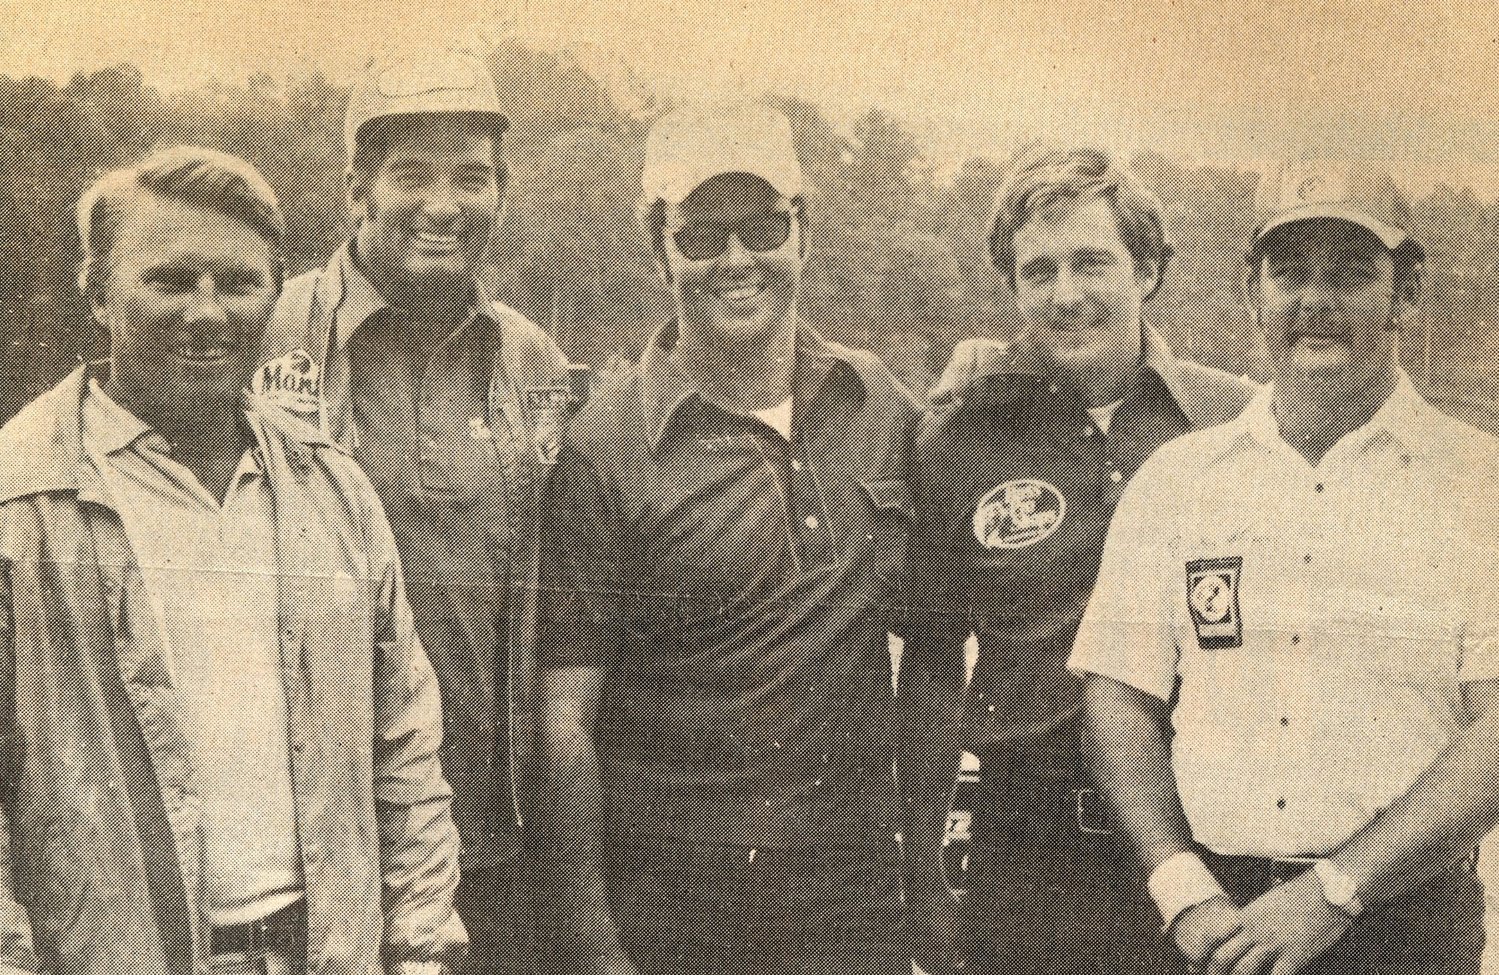 Left to right: Legendary anglers Roland Martin, Tom Mann, Bill Dance, Johnny Morris and Ricky Green.